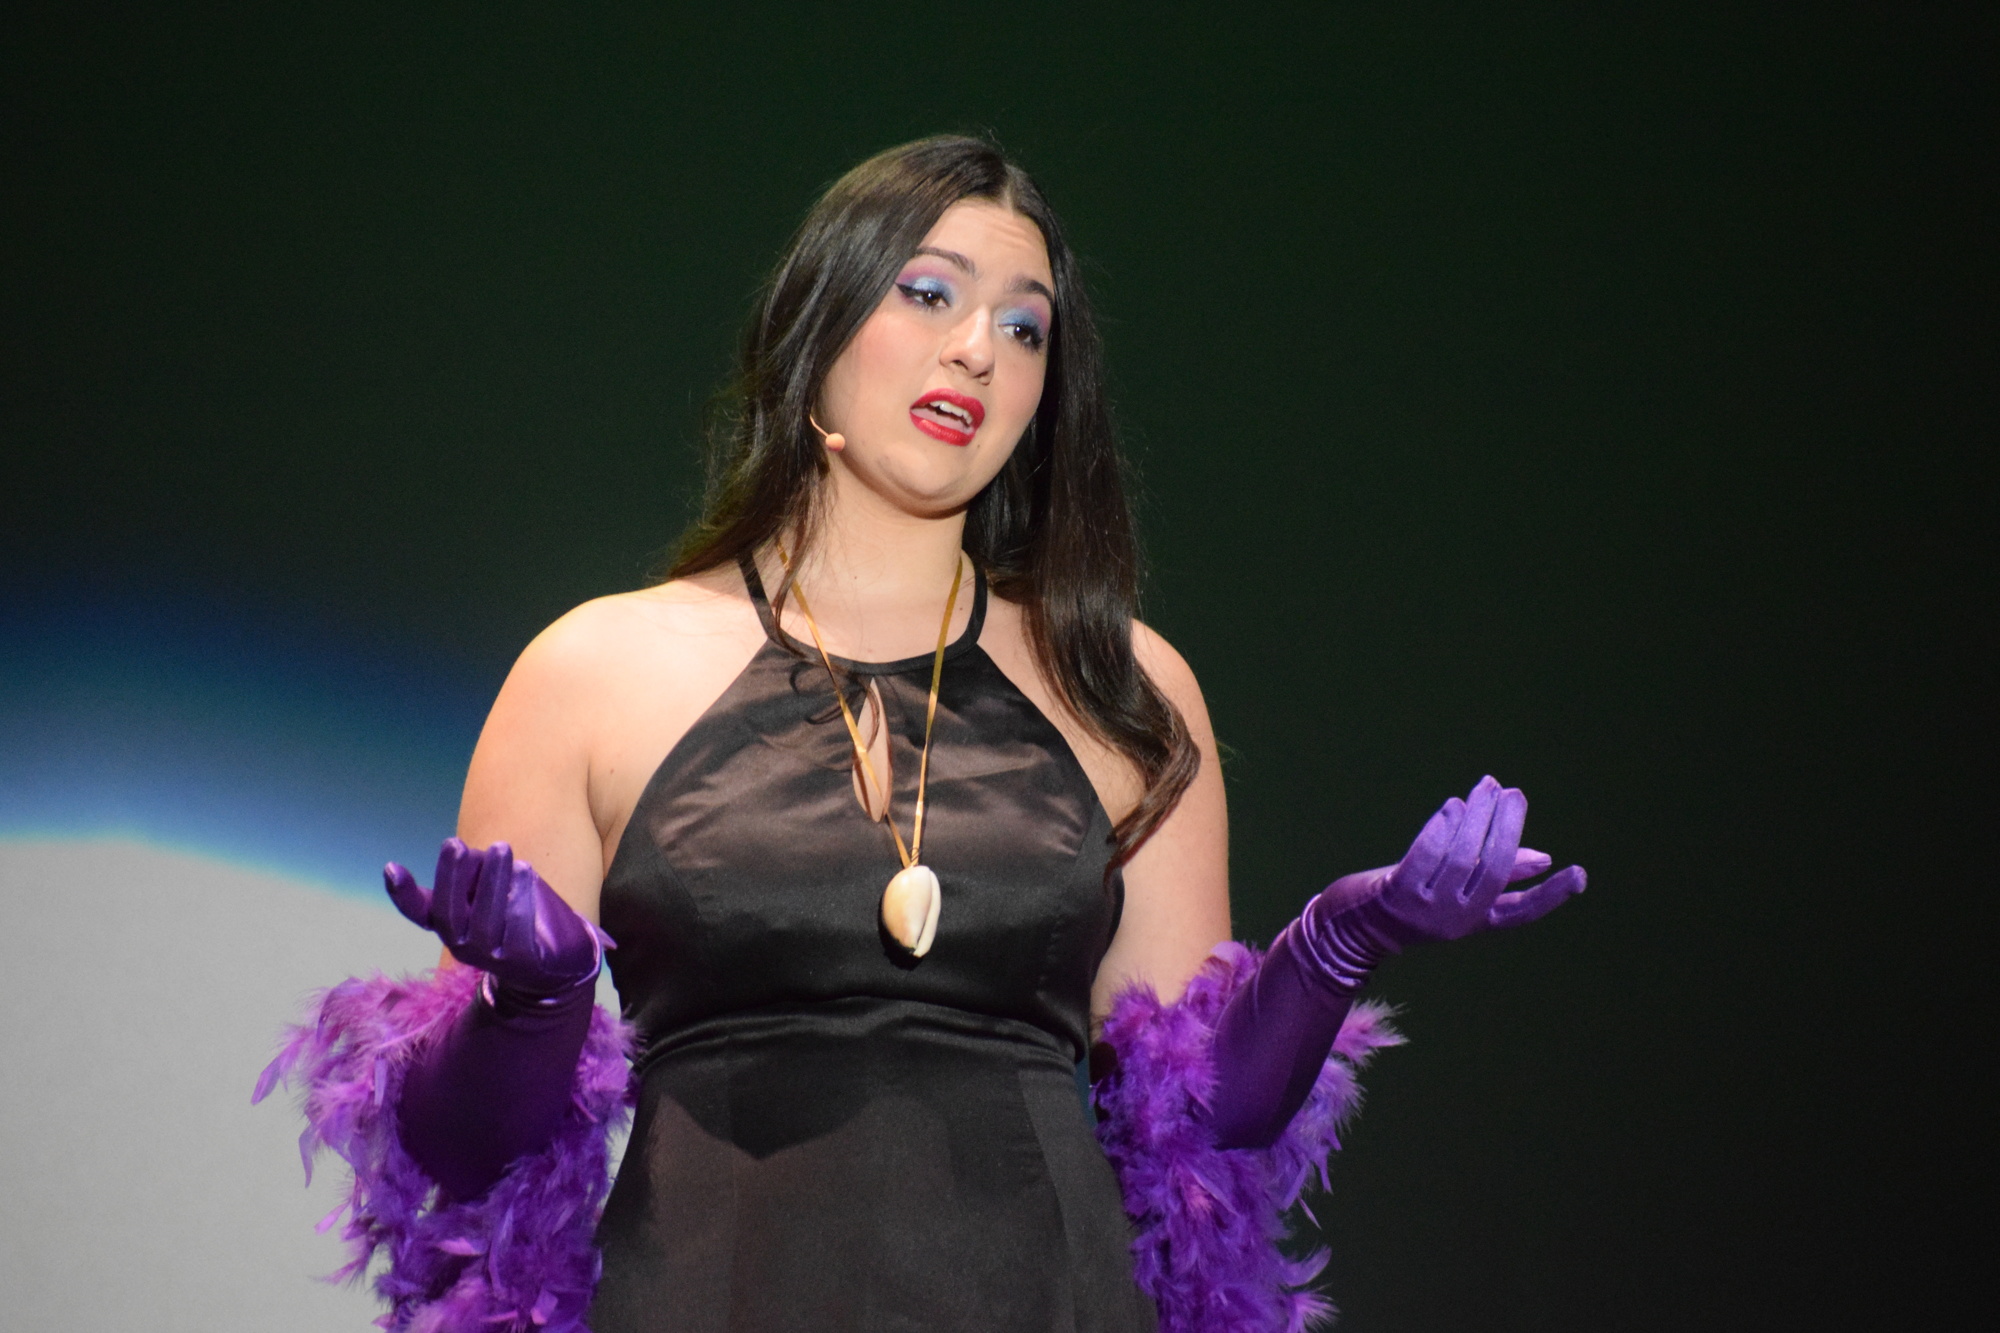 Braden River High School's Nicole Lykiardopoulos, who graduated in May, acts as Ursula from 